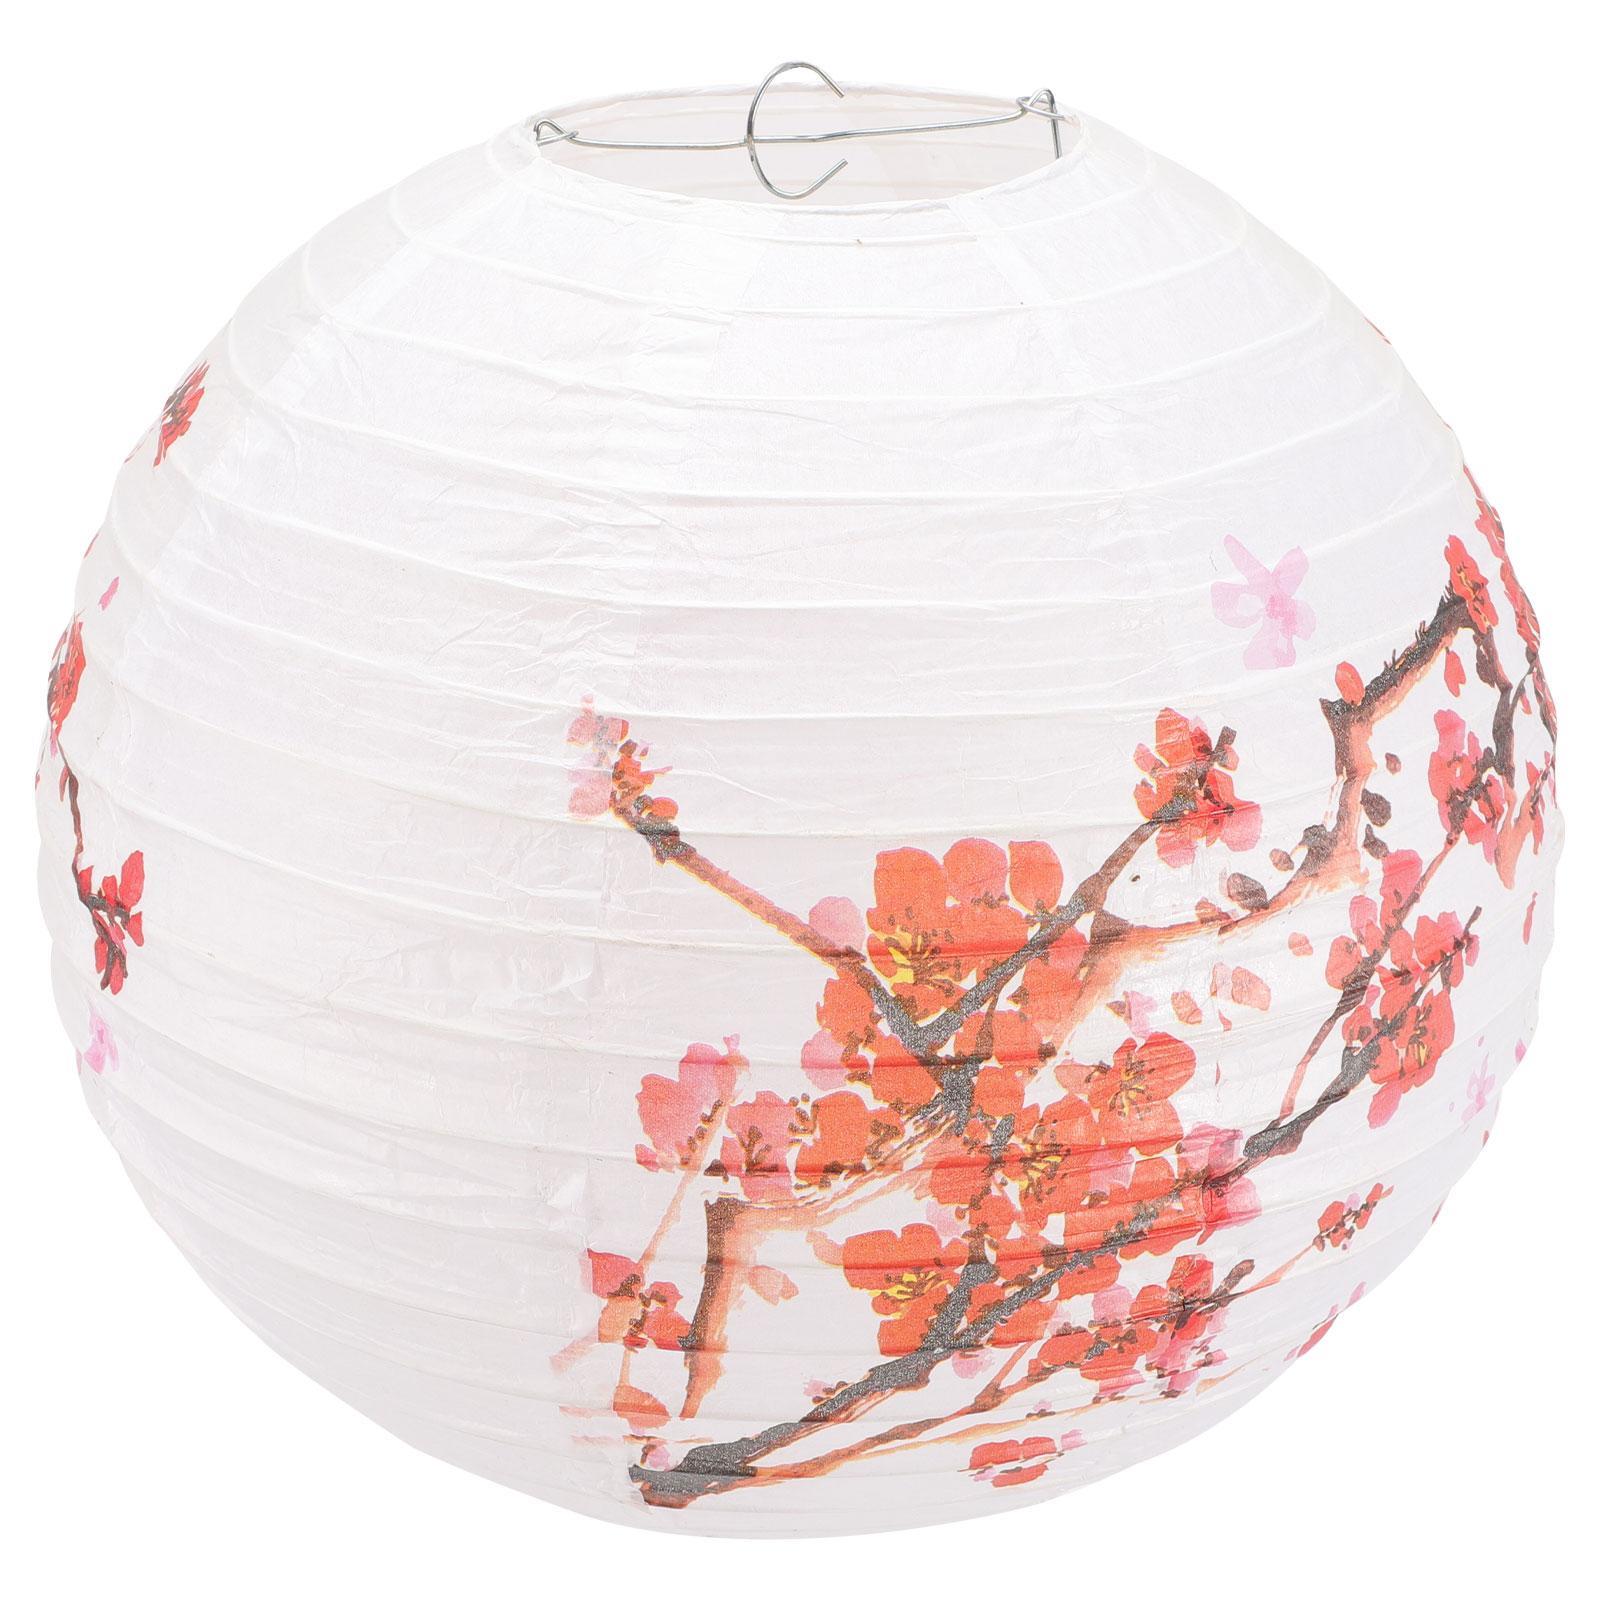 Paper Lantern Lamp Shade Outdoor Hanging Decorations Lanterns Cherry Blossoms